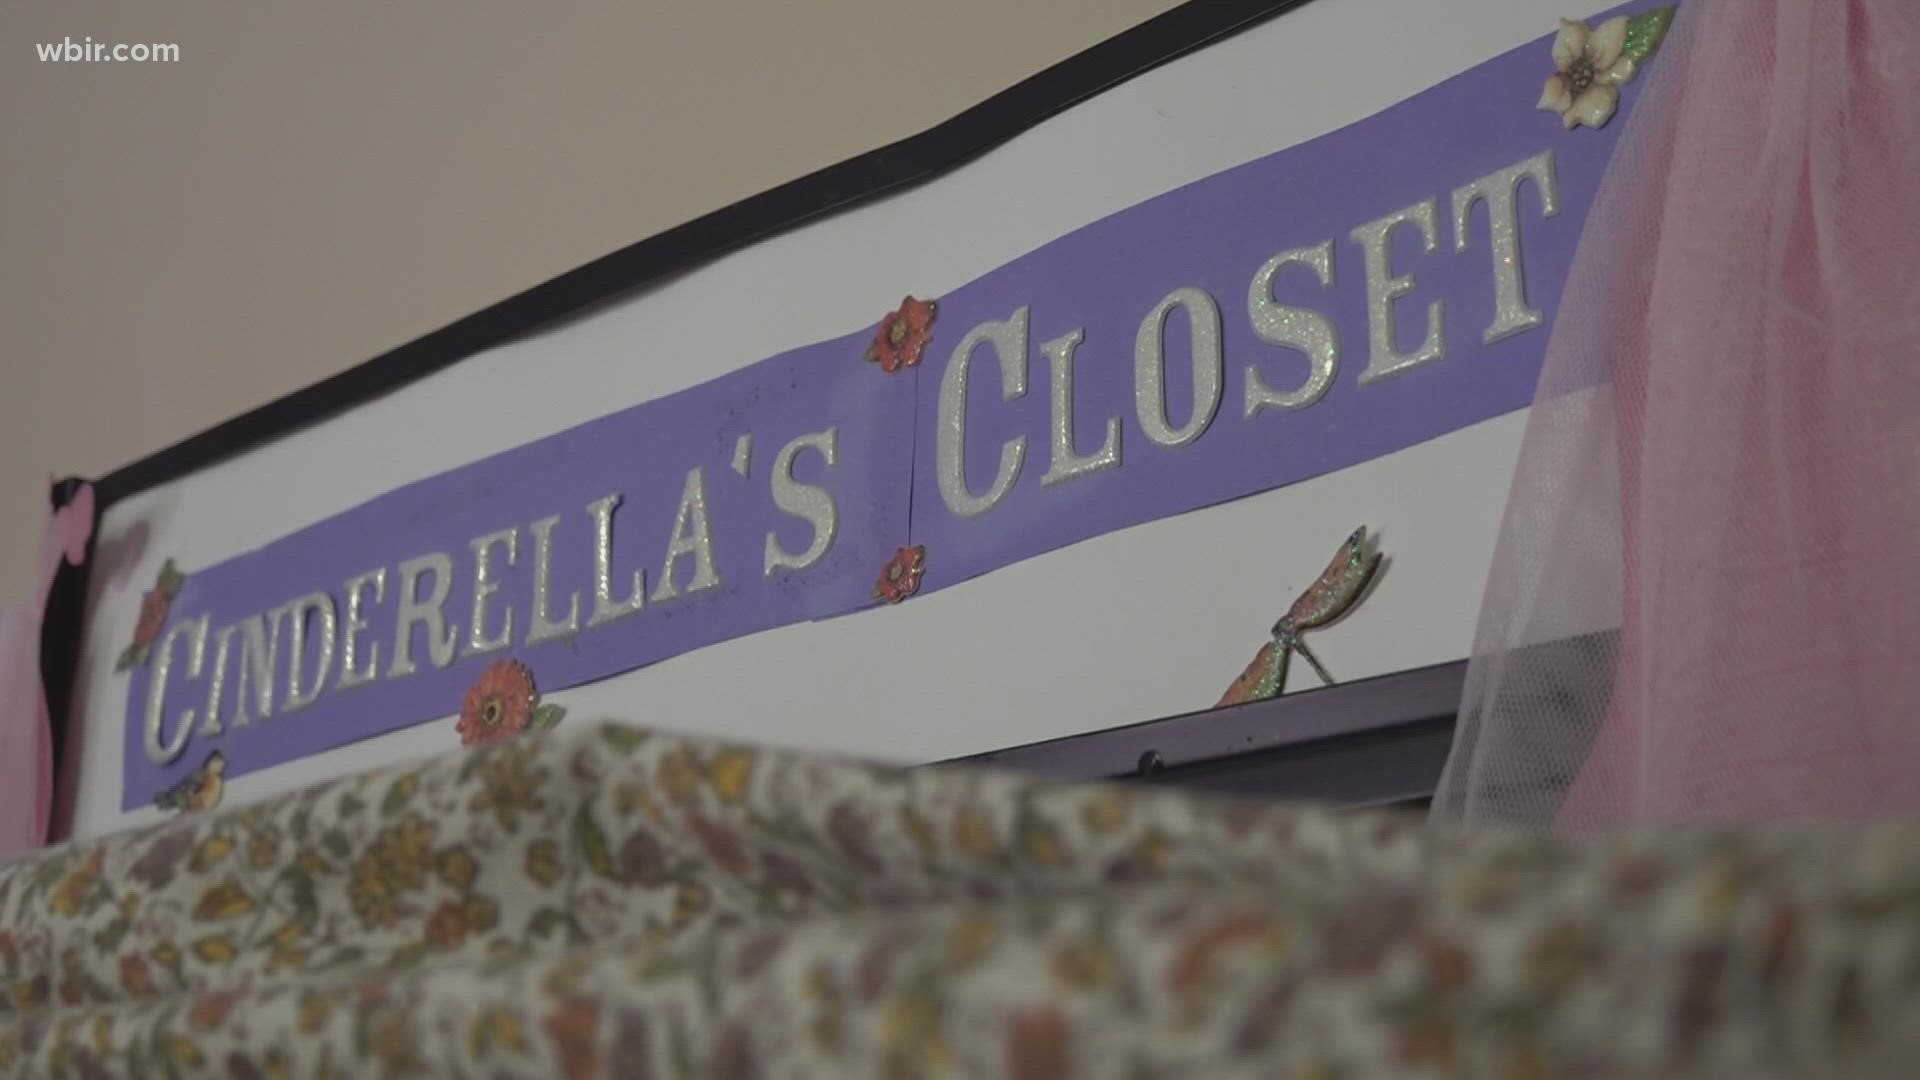 Cinderella's Closet tries to make dreams come true for young girls, ensuring they can feel like a princess at no cost.